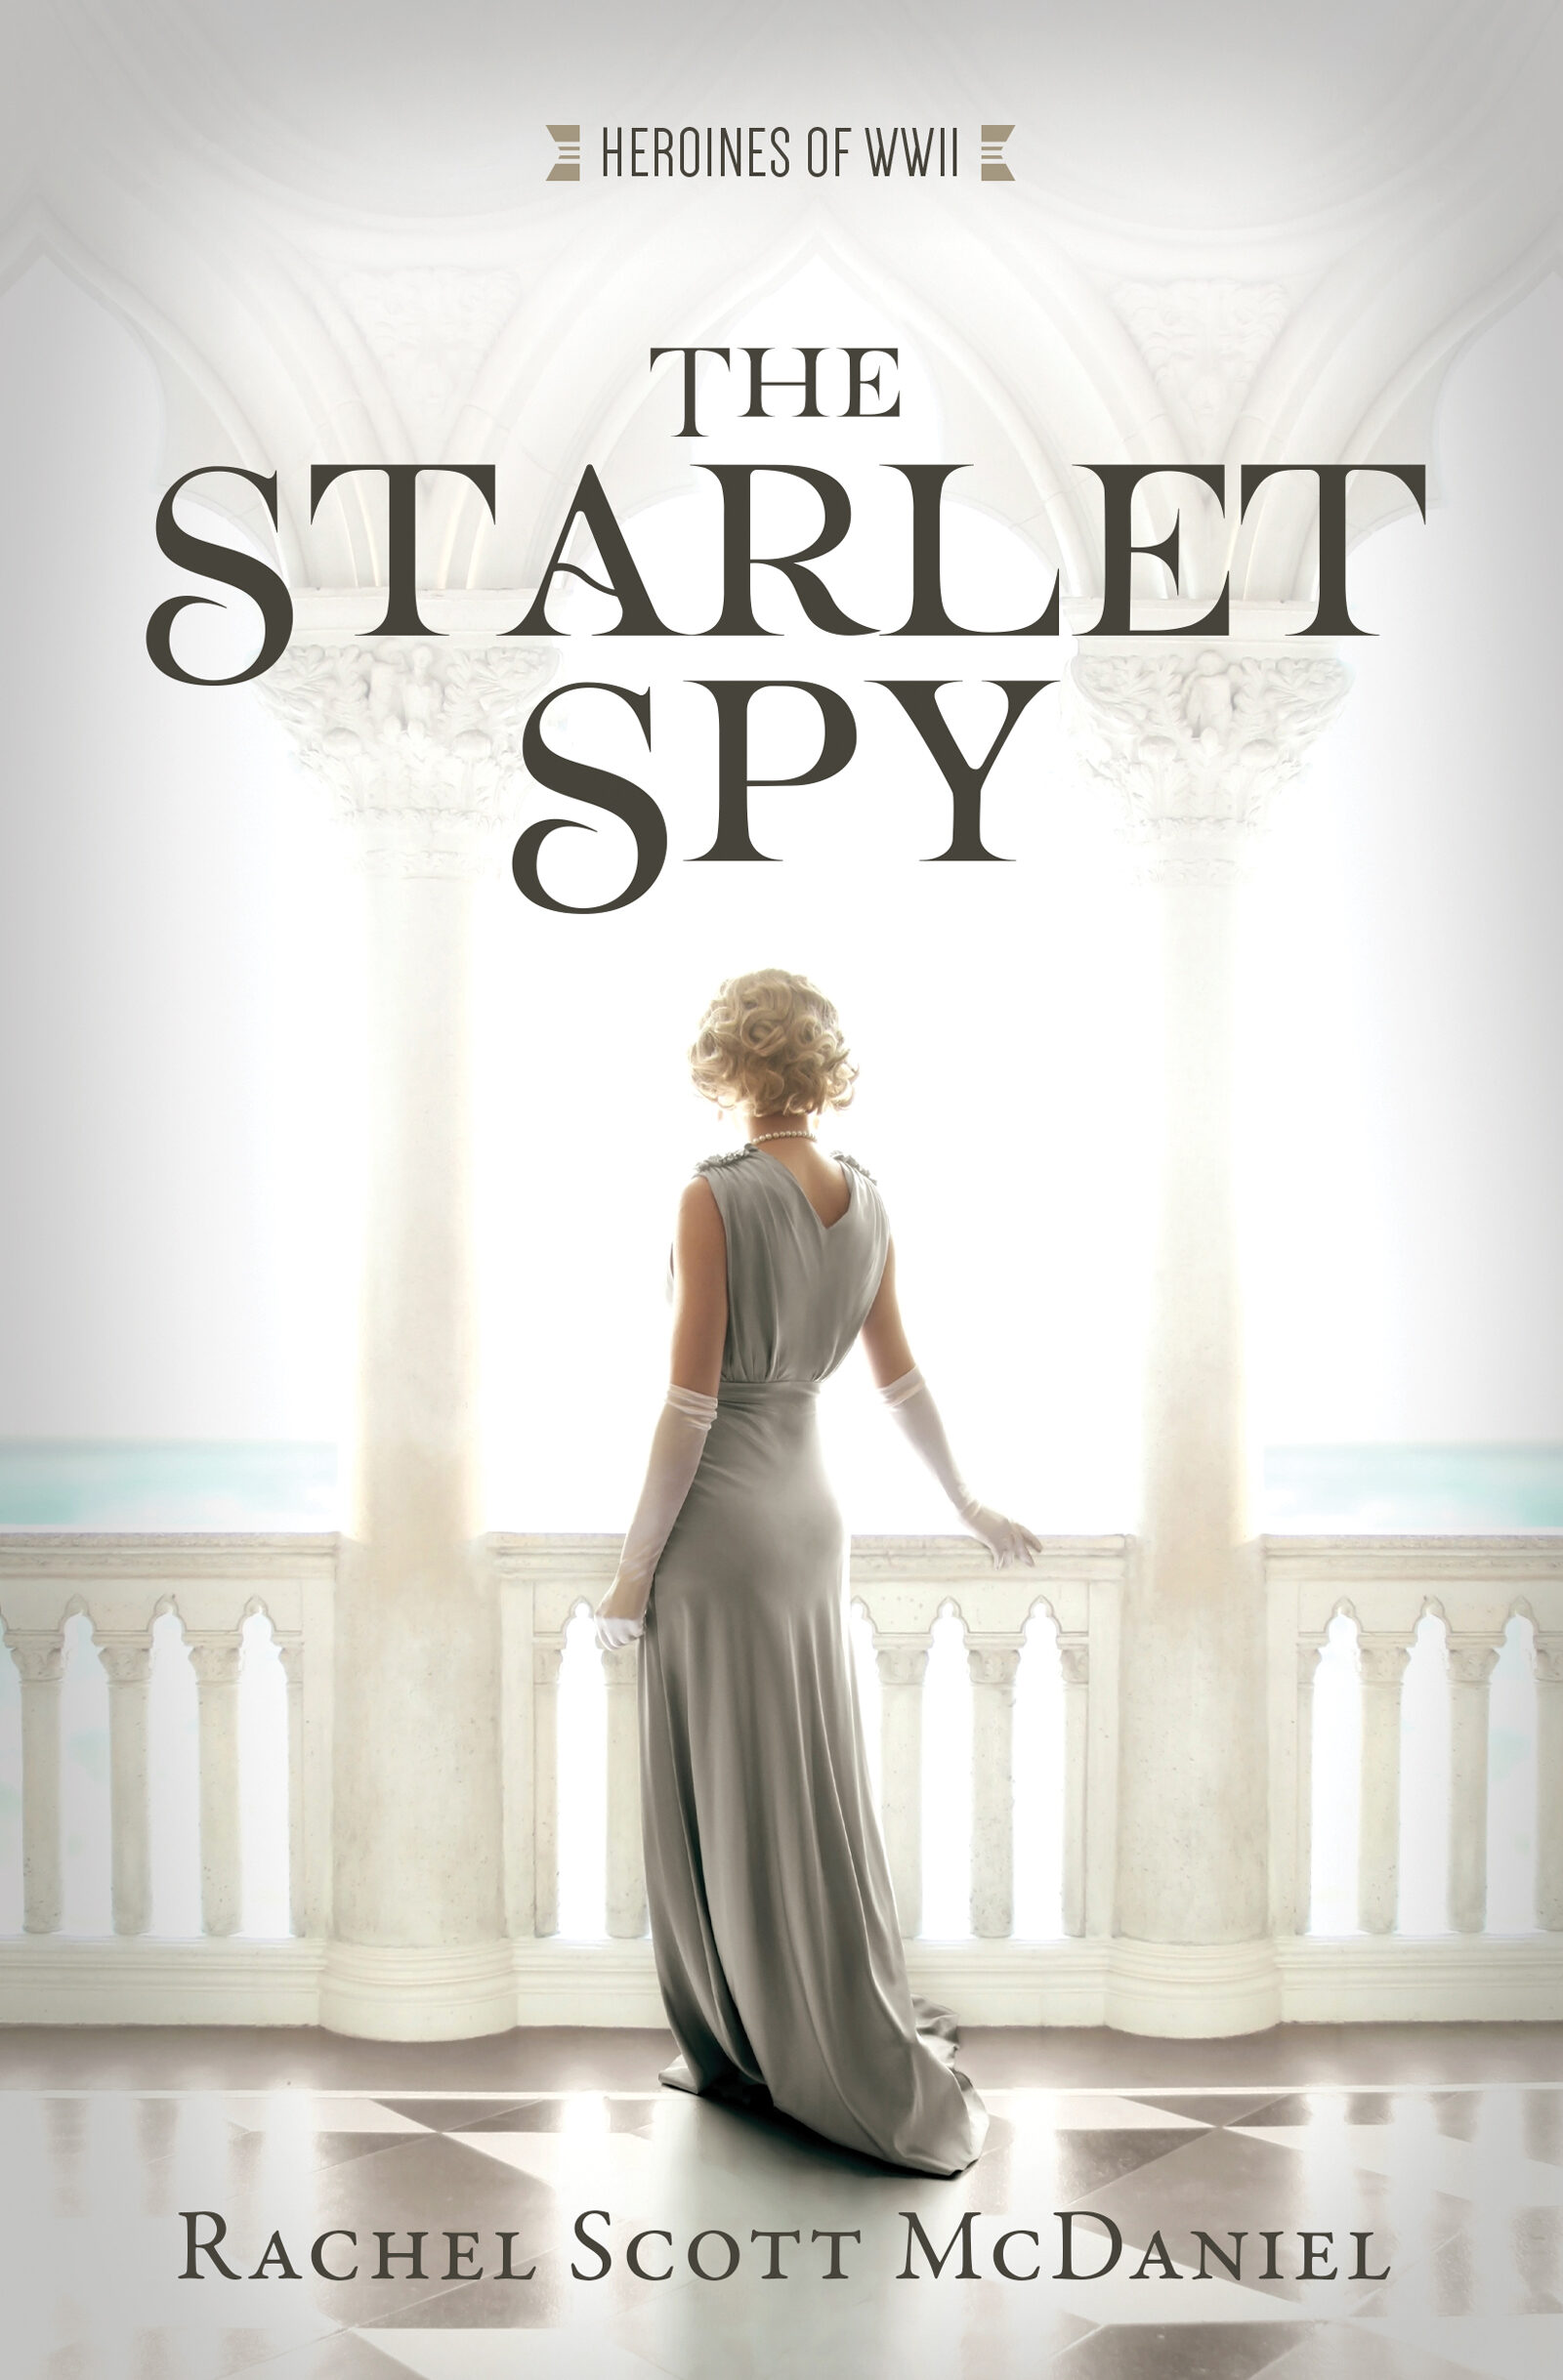 The Starlet Spy (Heroines Of WWII #11)